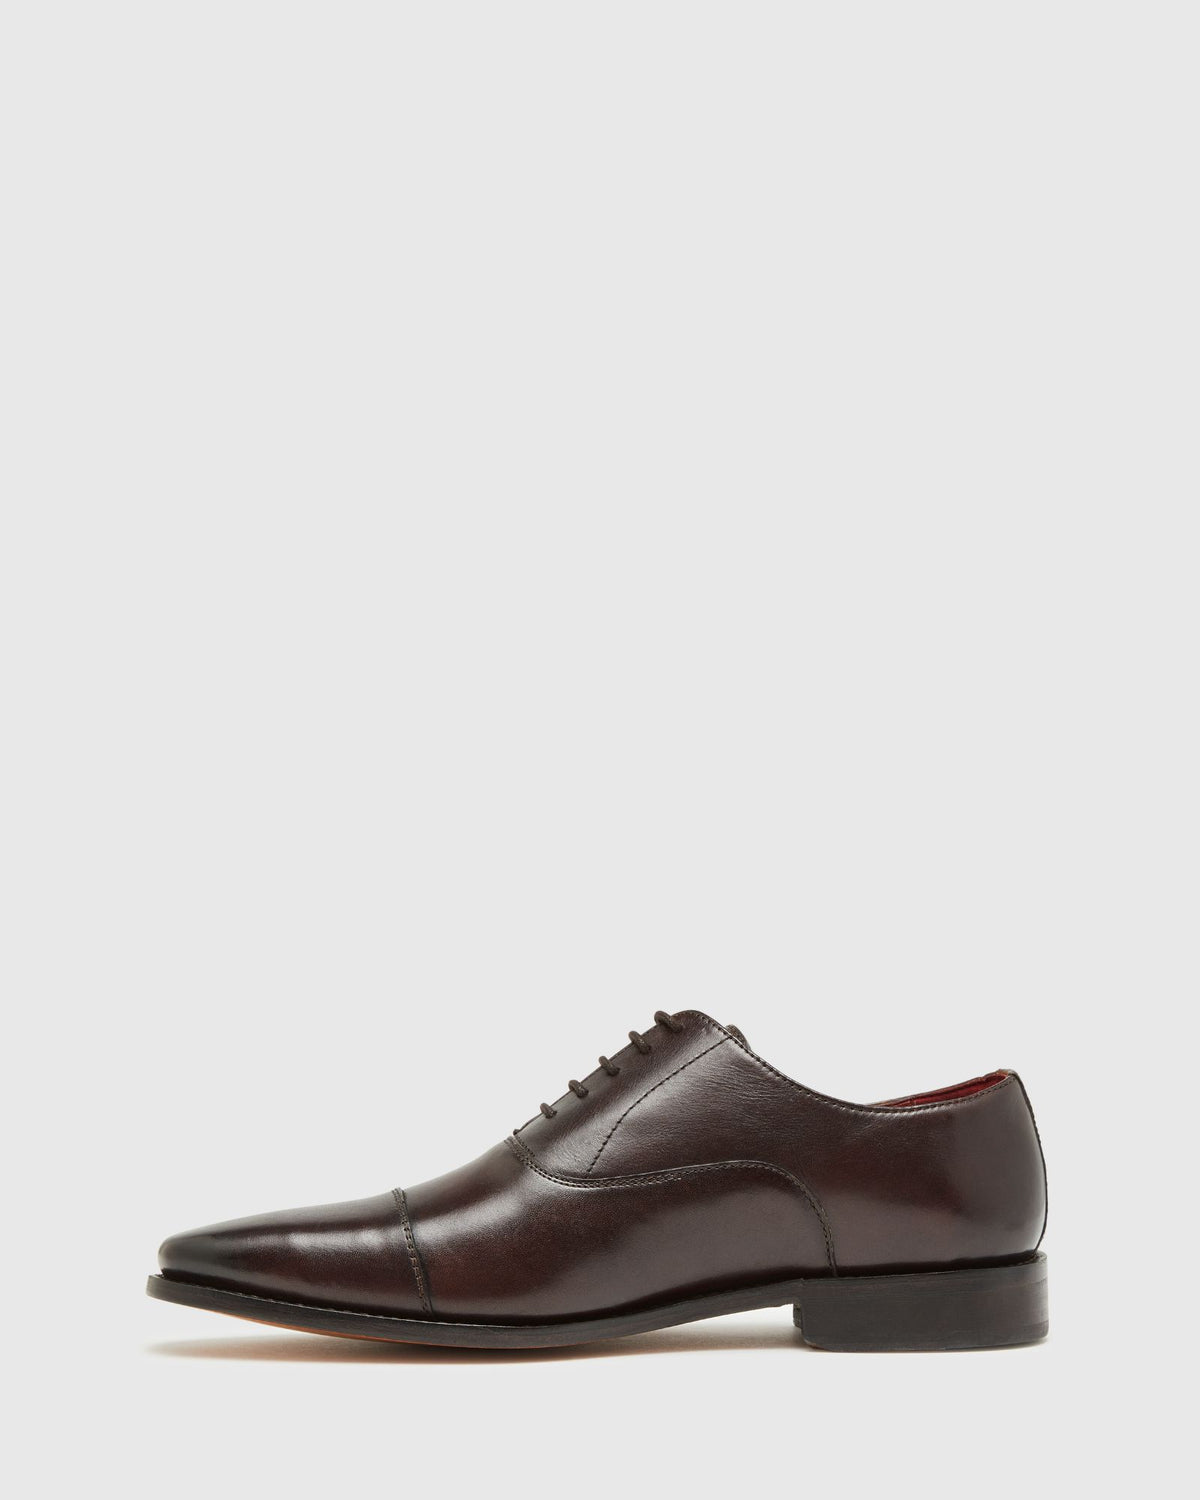 CHRISTOPHER GOODYEAR WELTED SHOES MENS SHOES